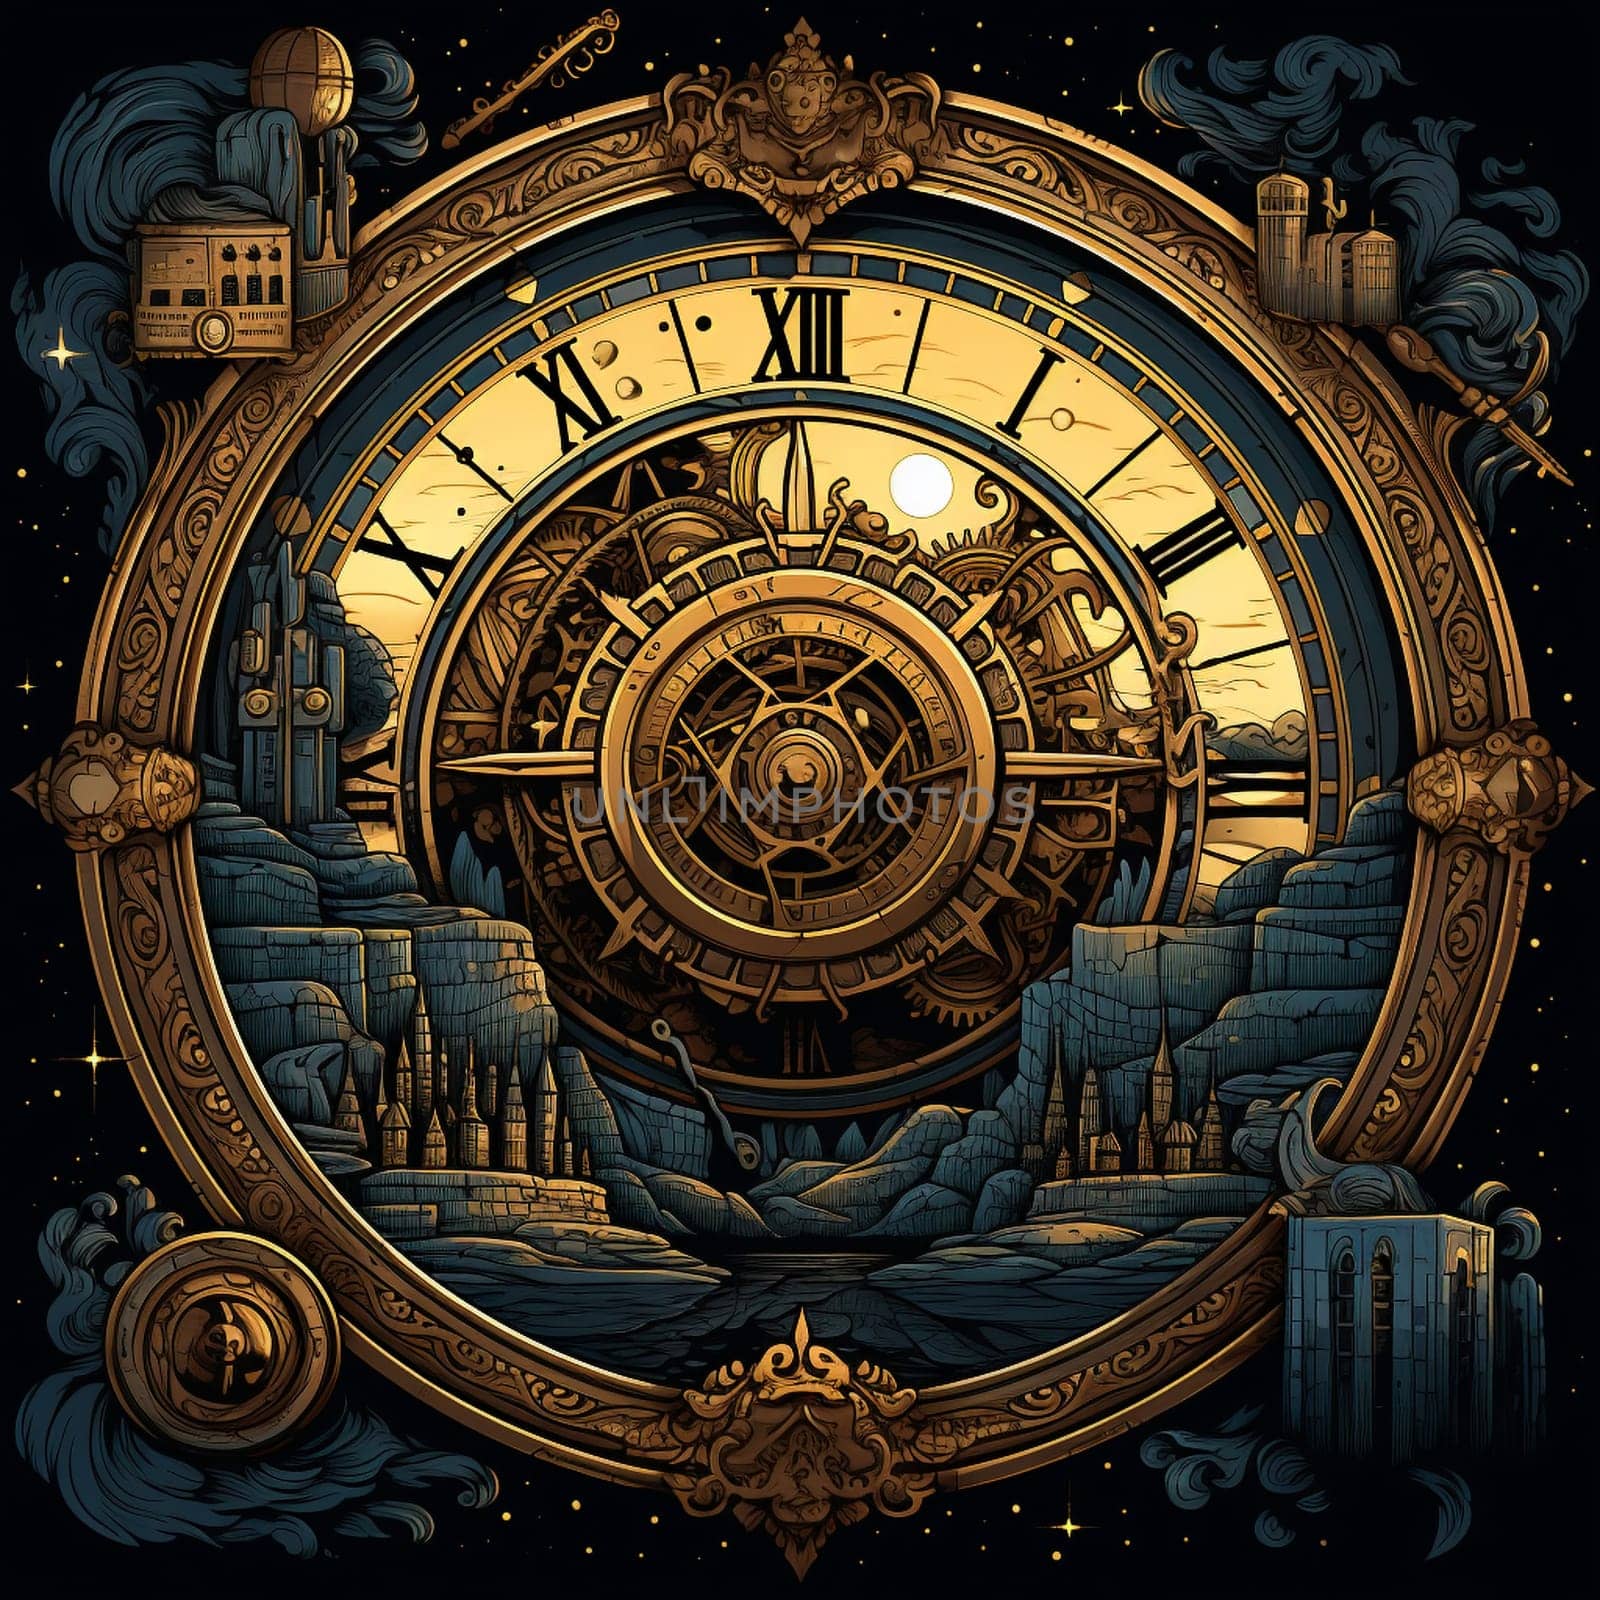 Enter a world of enchantment with this vintage clock, adorned with intricate details and mysterious elements. In a hand-drawn storytelling art style, the clock comes to life with its steam-powered gears and glowing mystical symbols. Surrounding the clock are objects that hint at different tales and stories, with fairies and anthropomorphic animals engaged in peculiar activities nearby. This captivating image evokes curiosity and sparks the imagination, leaving viewers wondering about the enchanting stories hidden within the clock's intricate mechanisms.